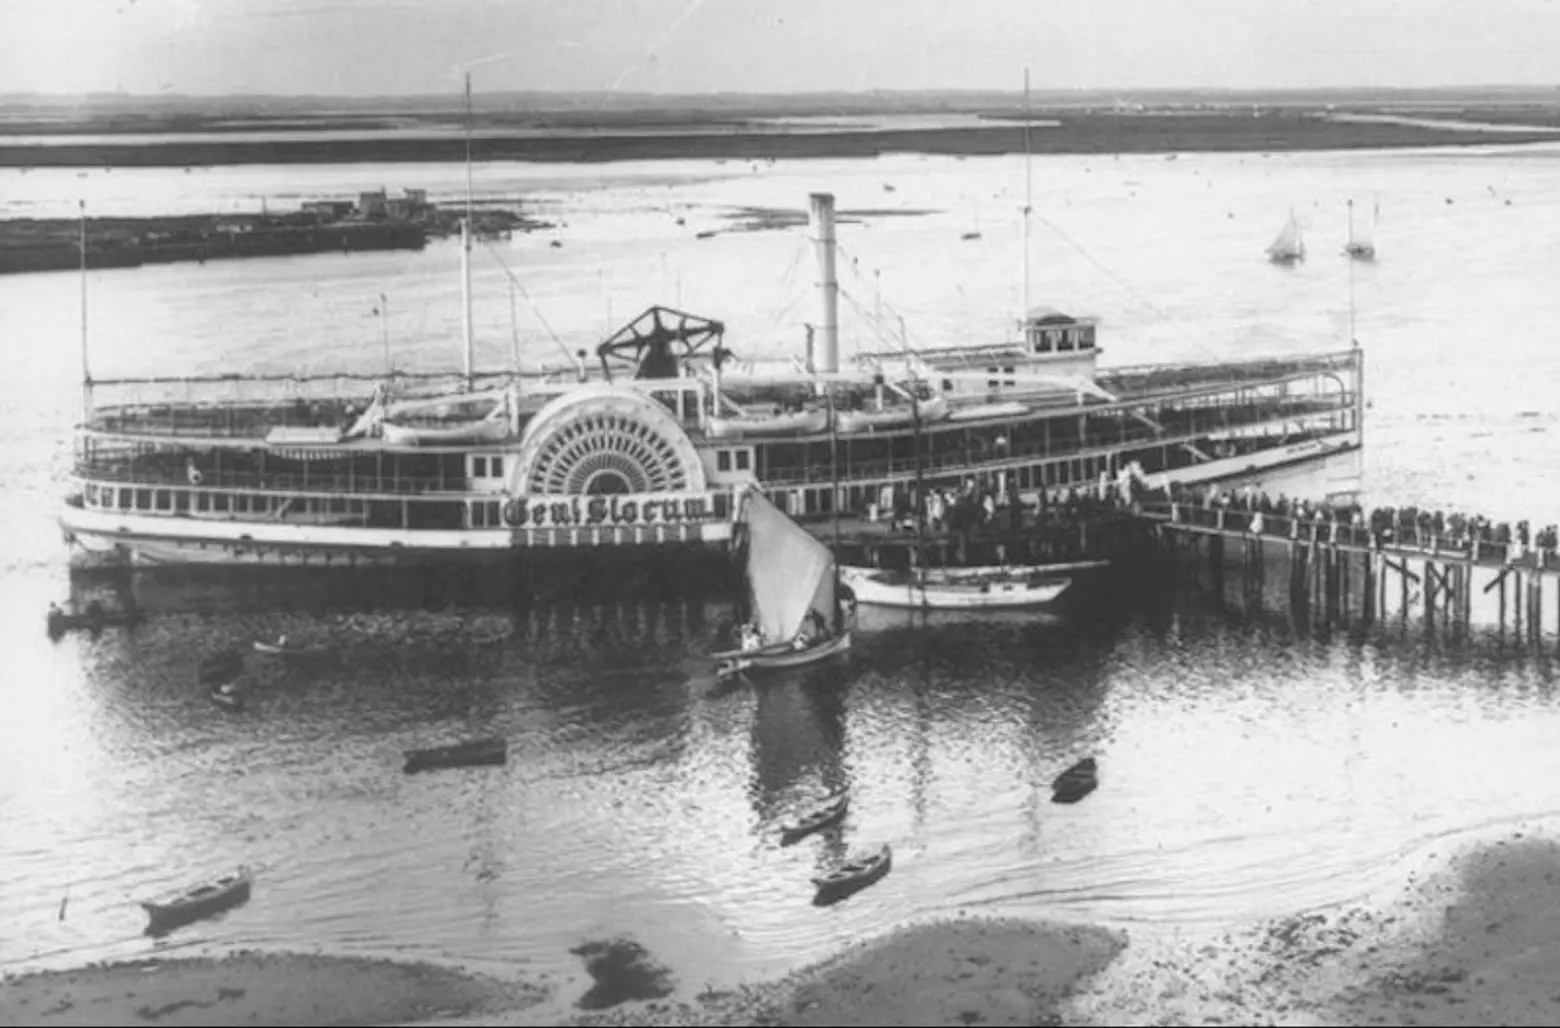 Remembering the worst disaster in NYC maritime history: The sinking of the General Slocum ferry